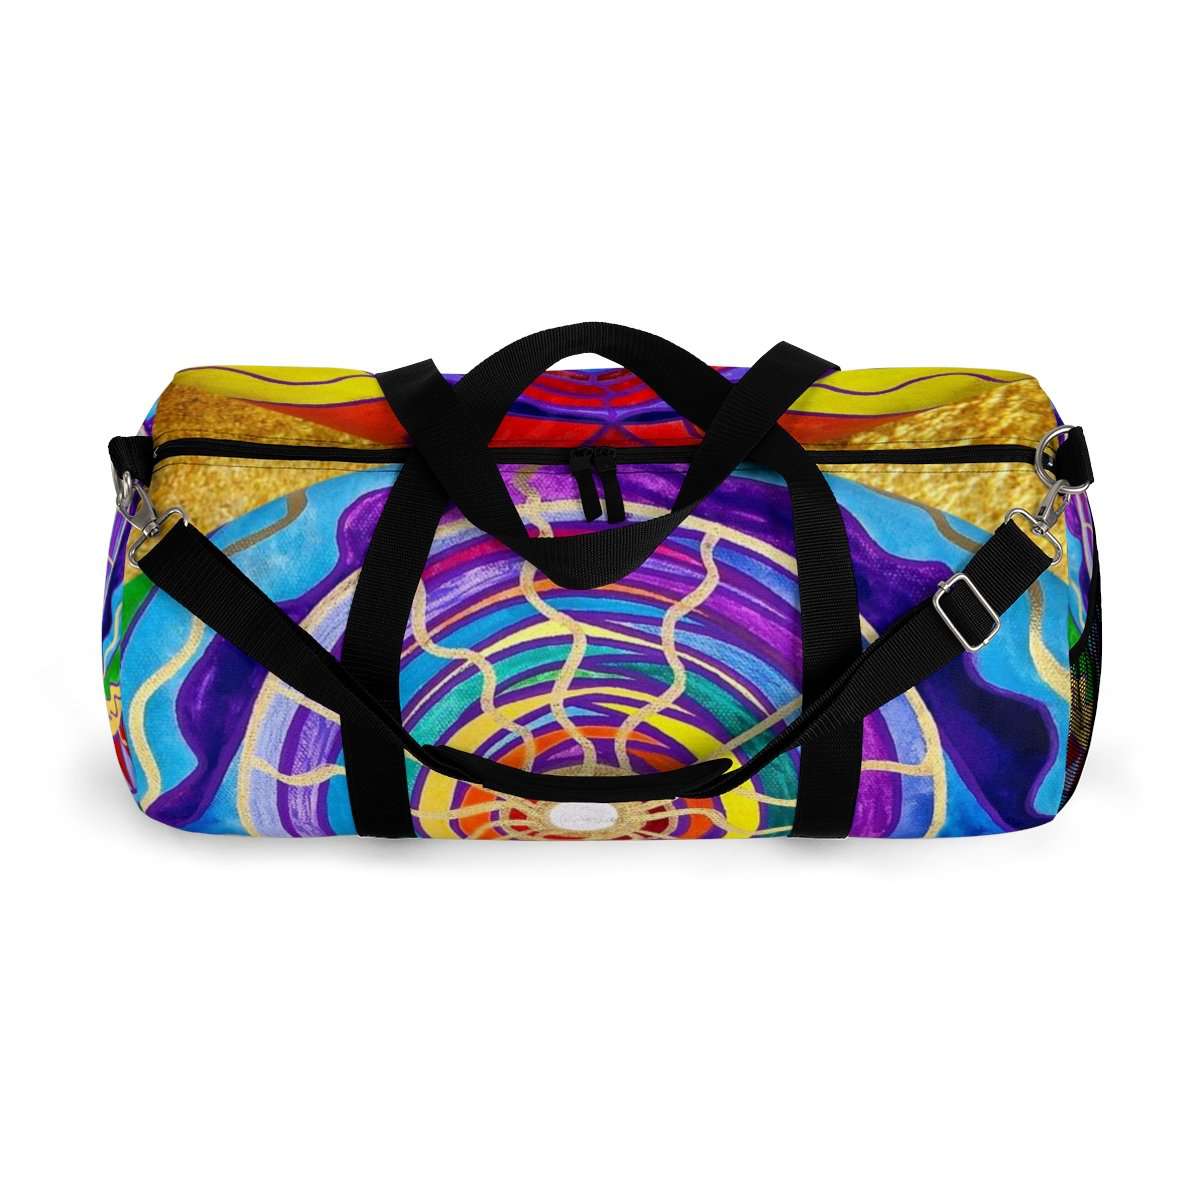 we-have-the-best-selection-of-raise-your-vibration-duffle-bag-online_10.jpg